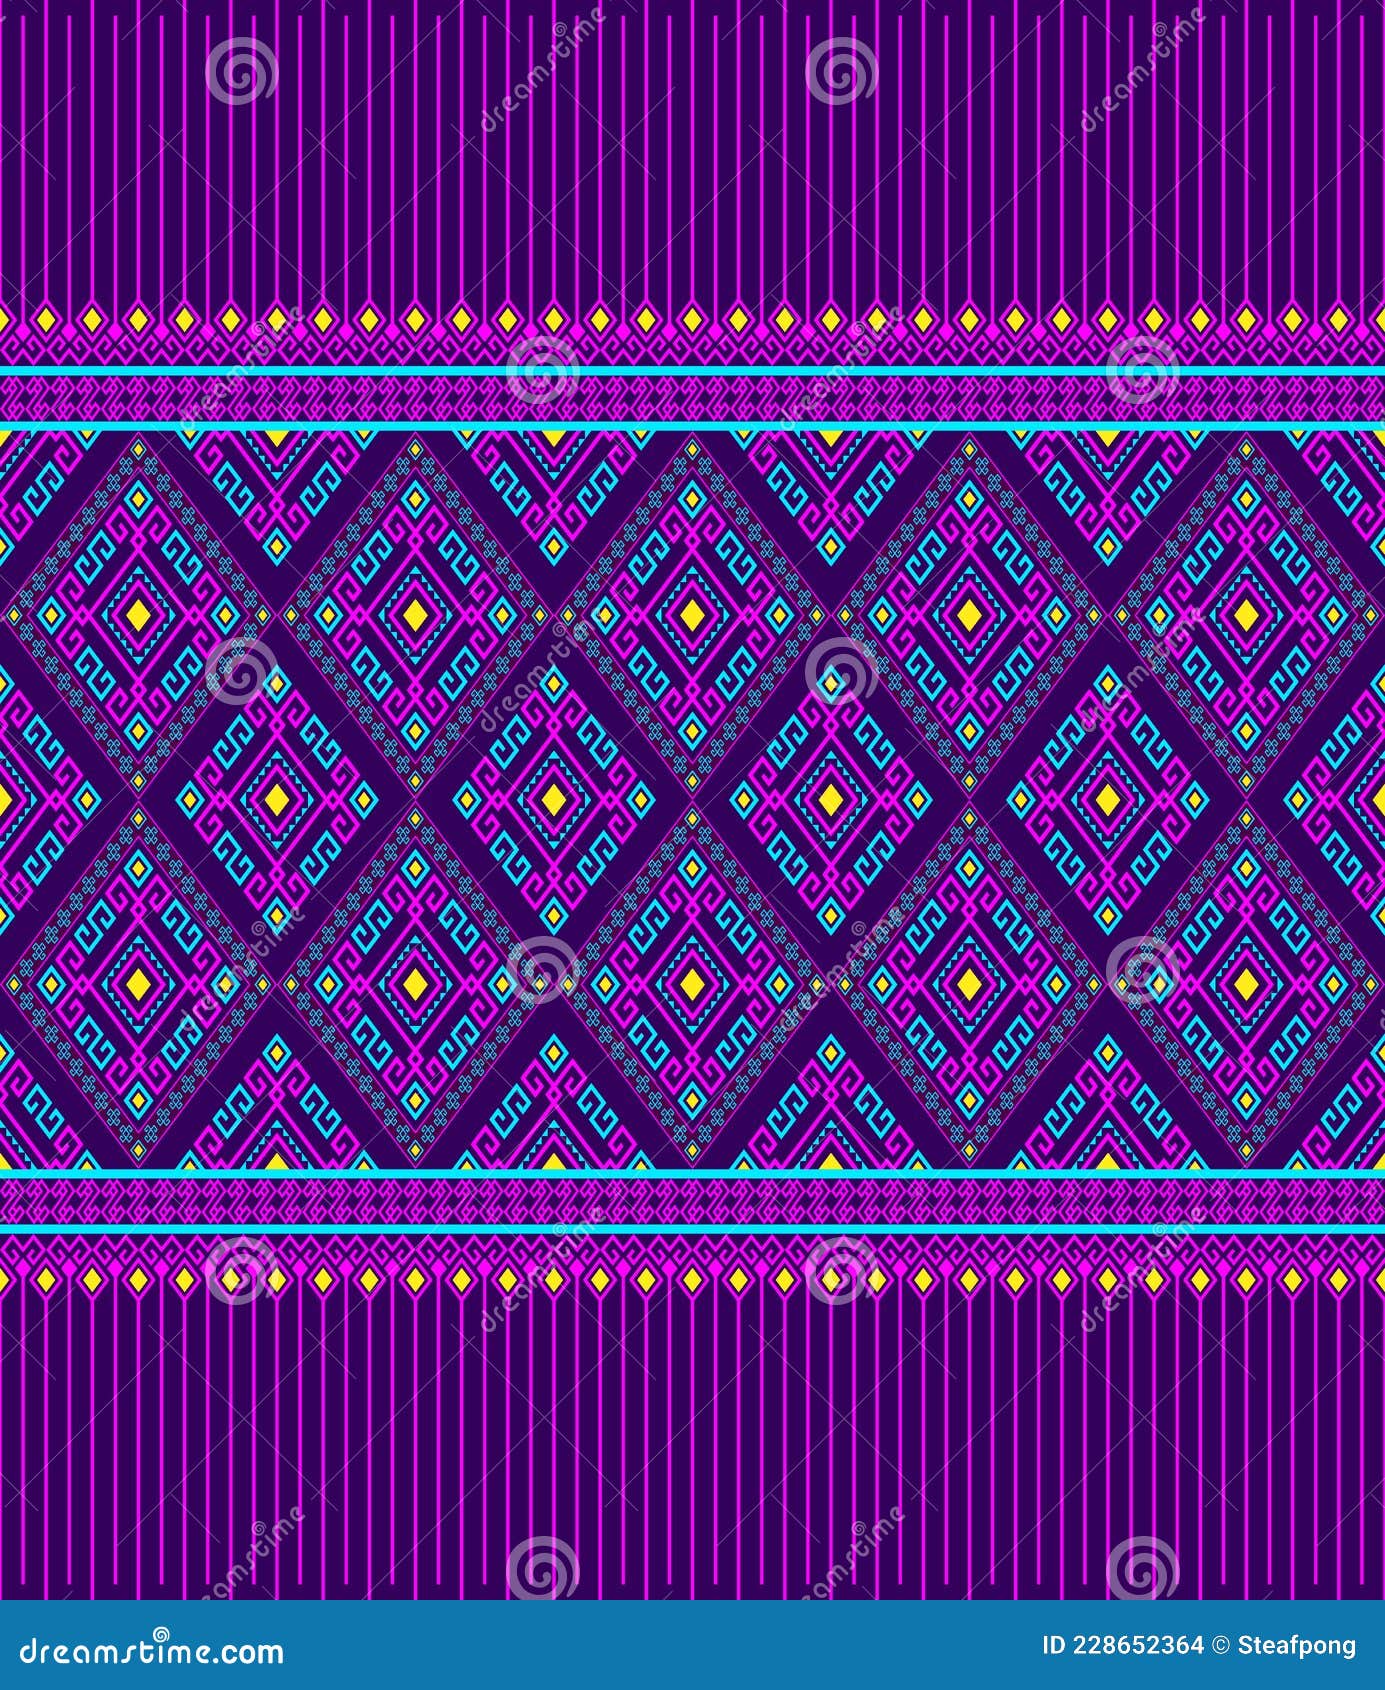 Magenta Turquoise Symmetry Geometric Ethnic or Tribal Seamless Pattern on  Purple Background Stock Vector - Illustration of oriental, backdrop:  228652364